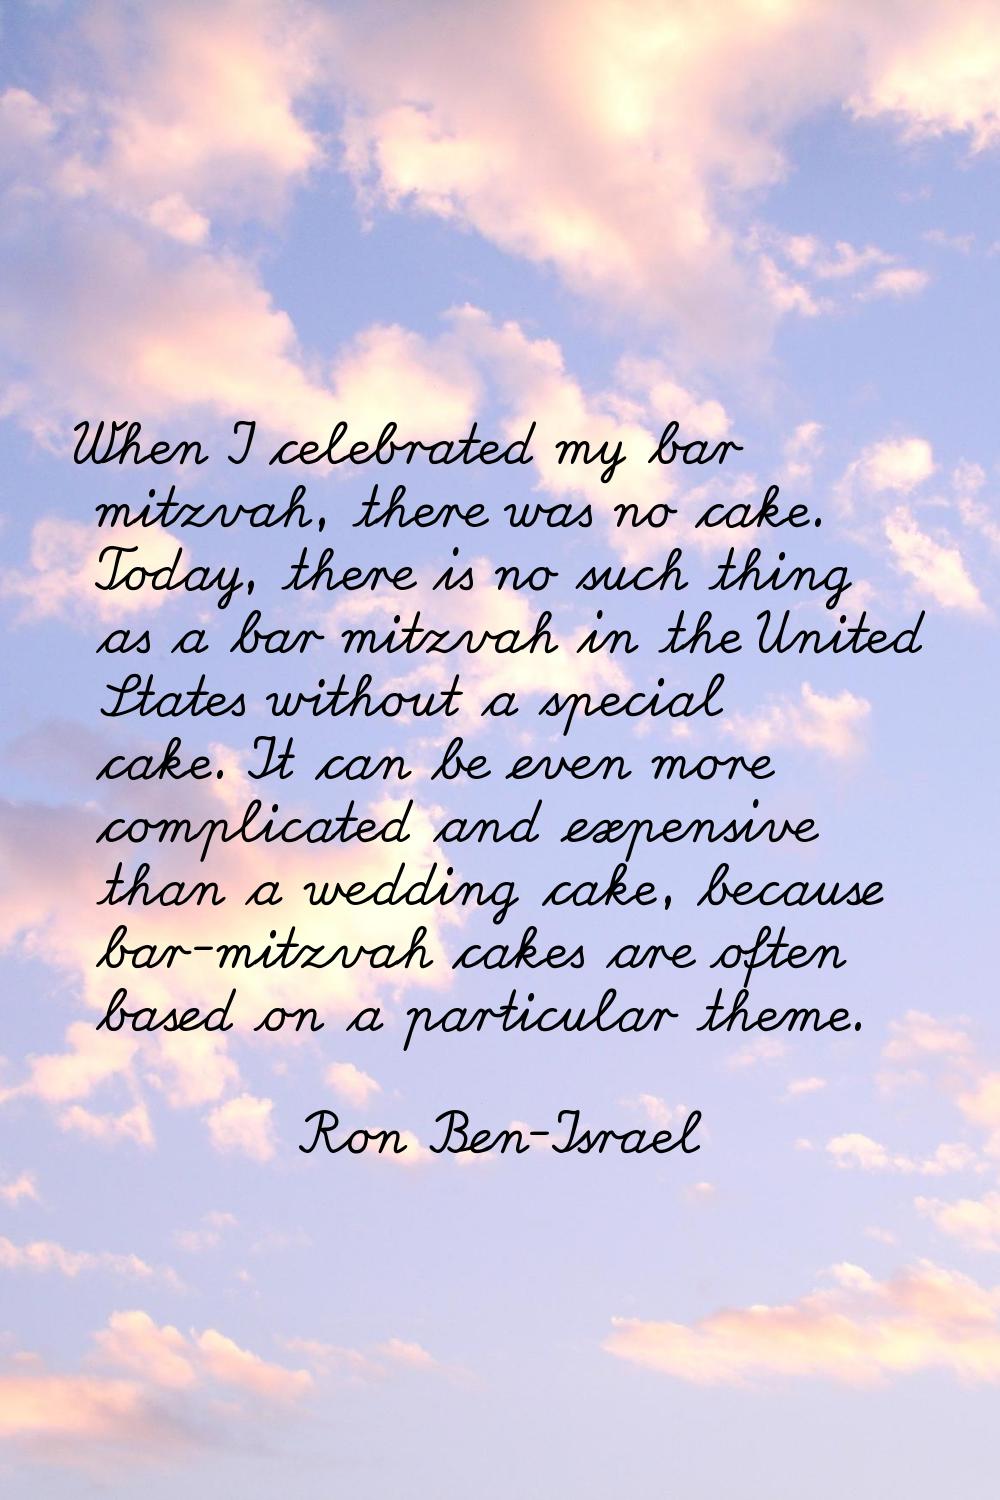 When I celebrated my bar mitzvah, there was no cake. Today, there is no such thing as a bar mitzvah